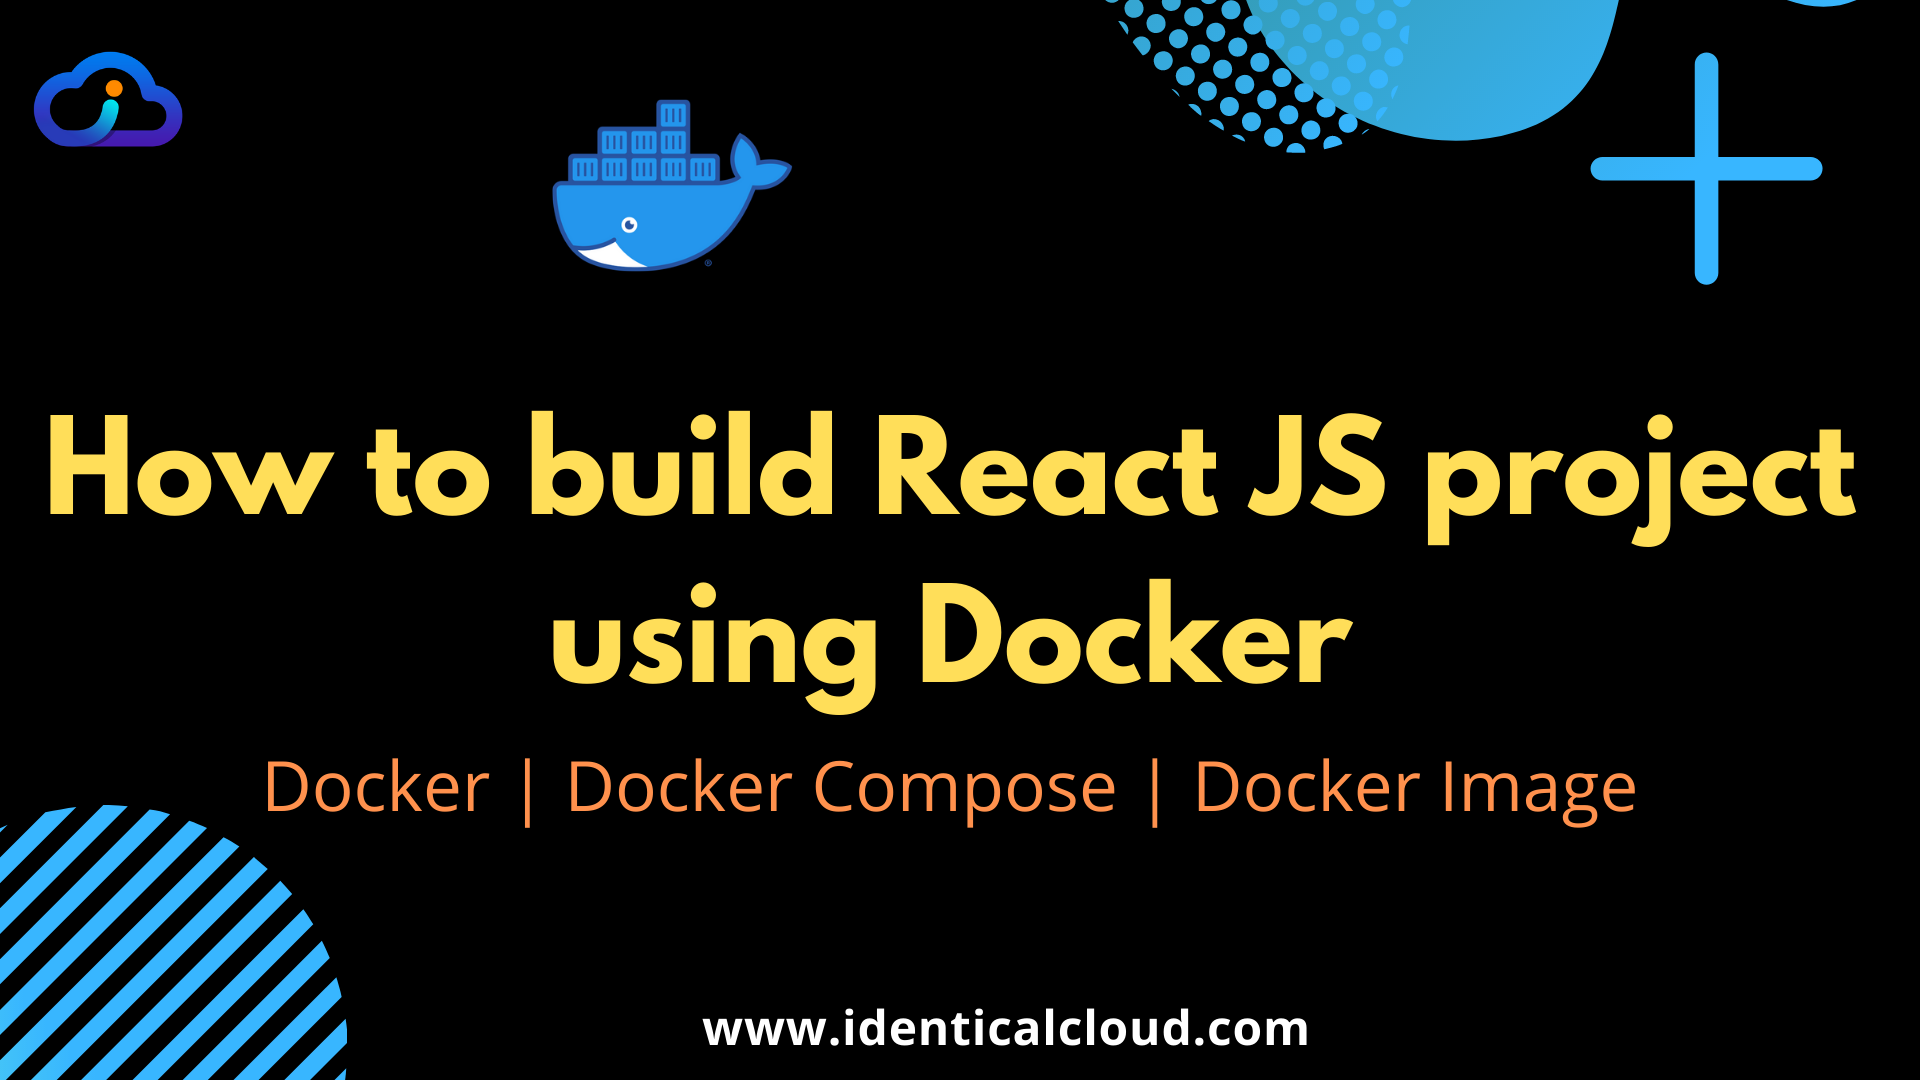 Build and Deploy ReactJS project using Docker